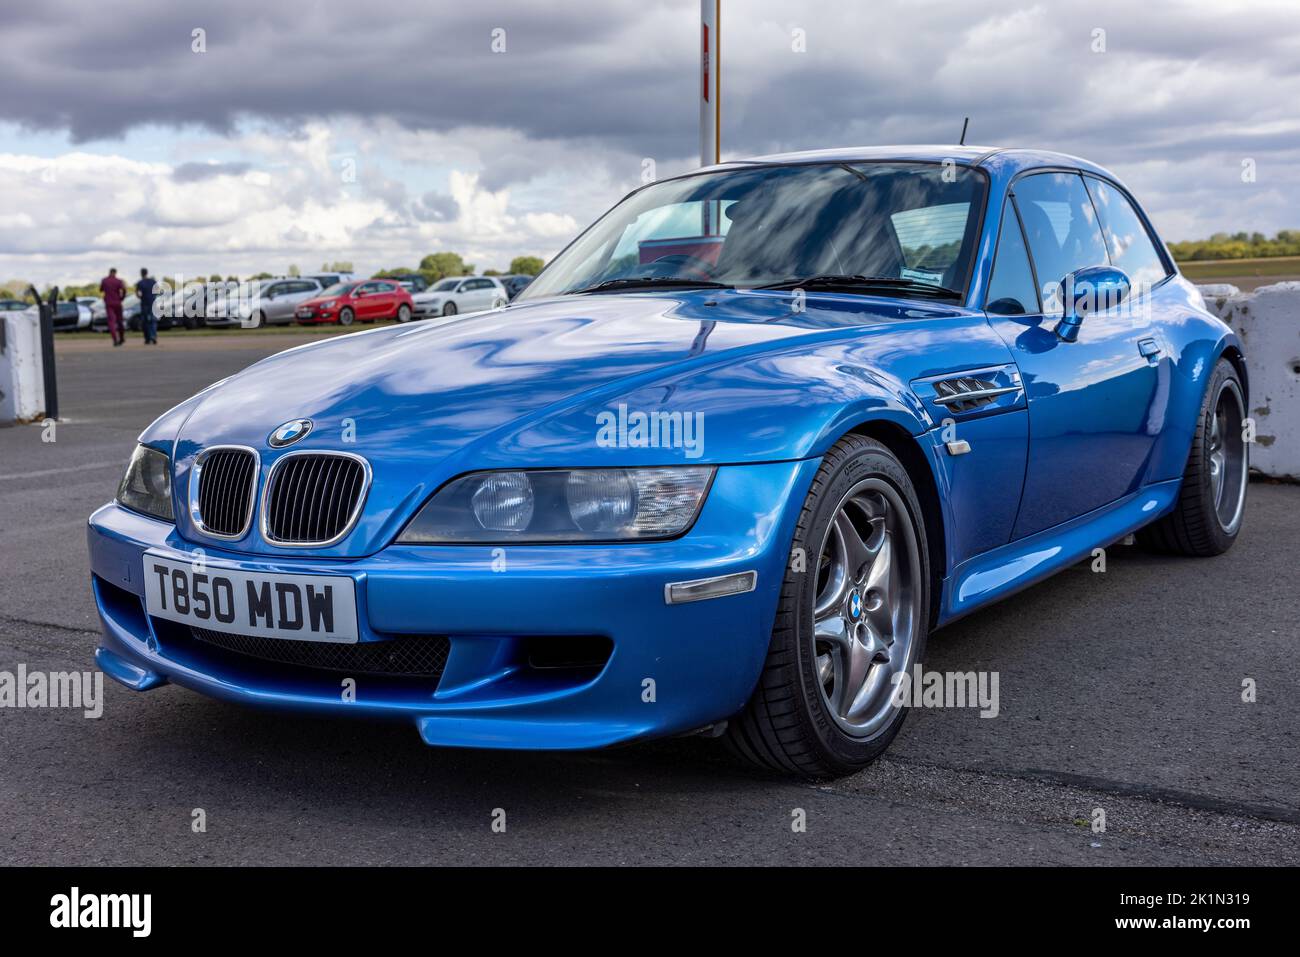 BMW Z3 M Coupe ‘T850 MDW’ on display at the Bicester Heritage Scramble celebrating 50 years of BMW M Stock Photo